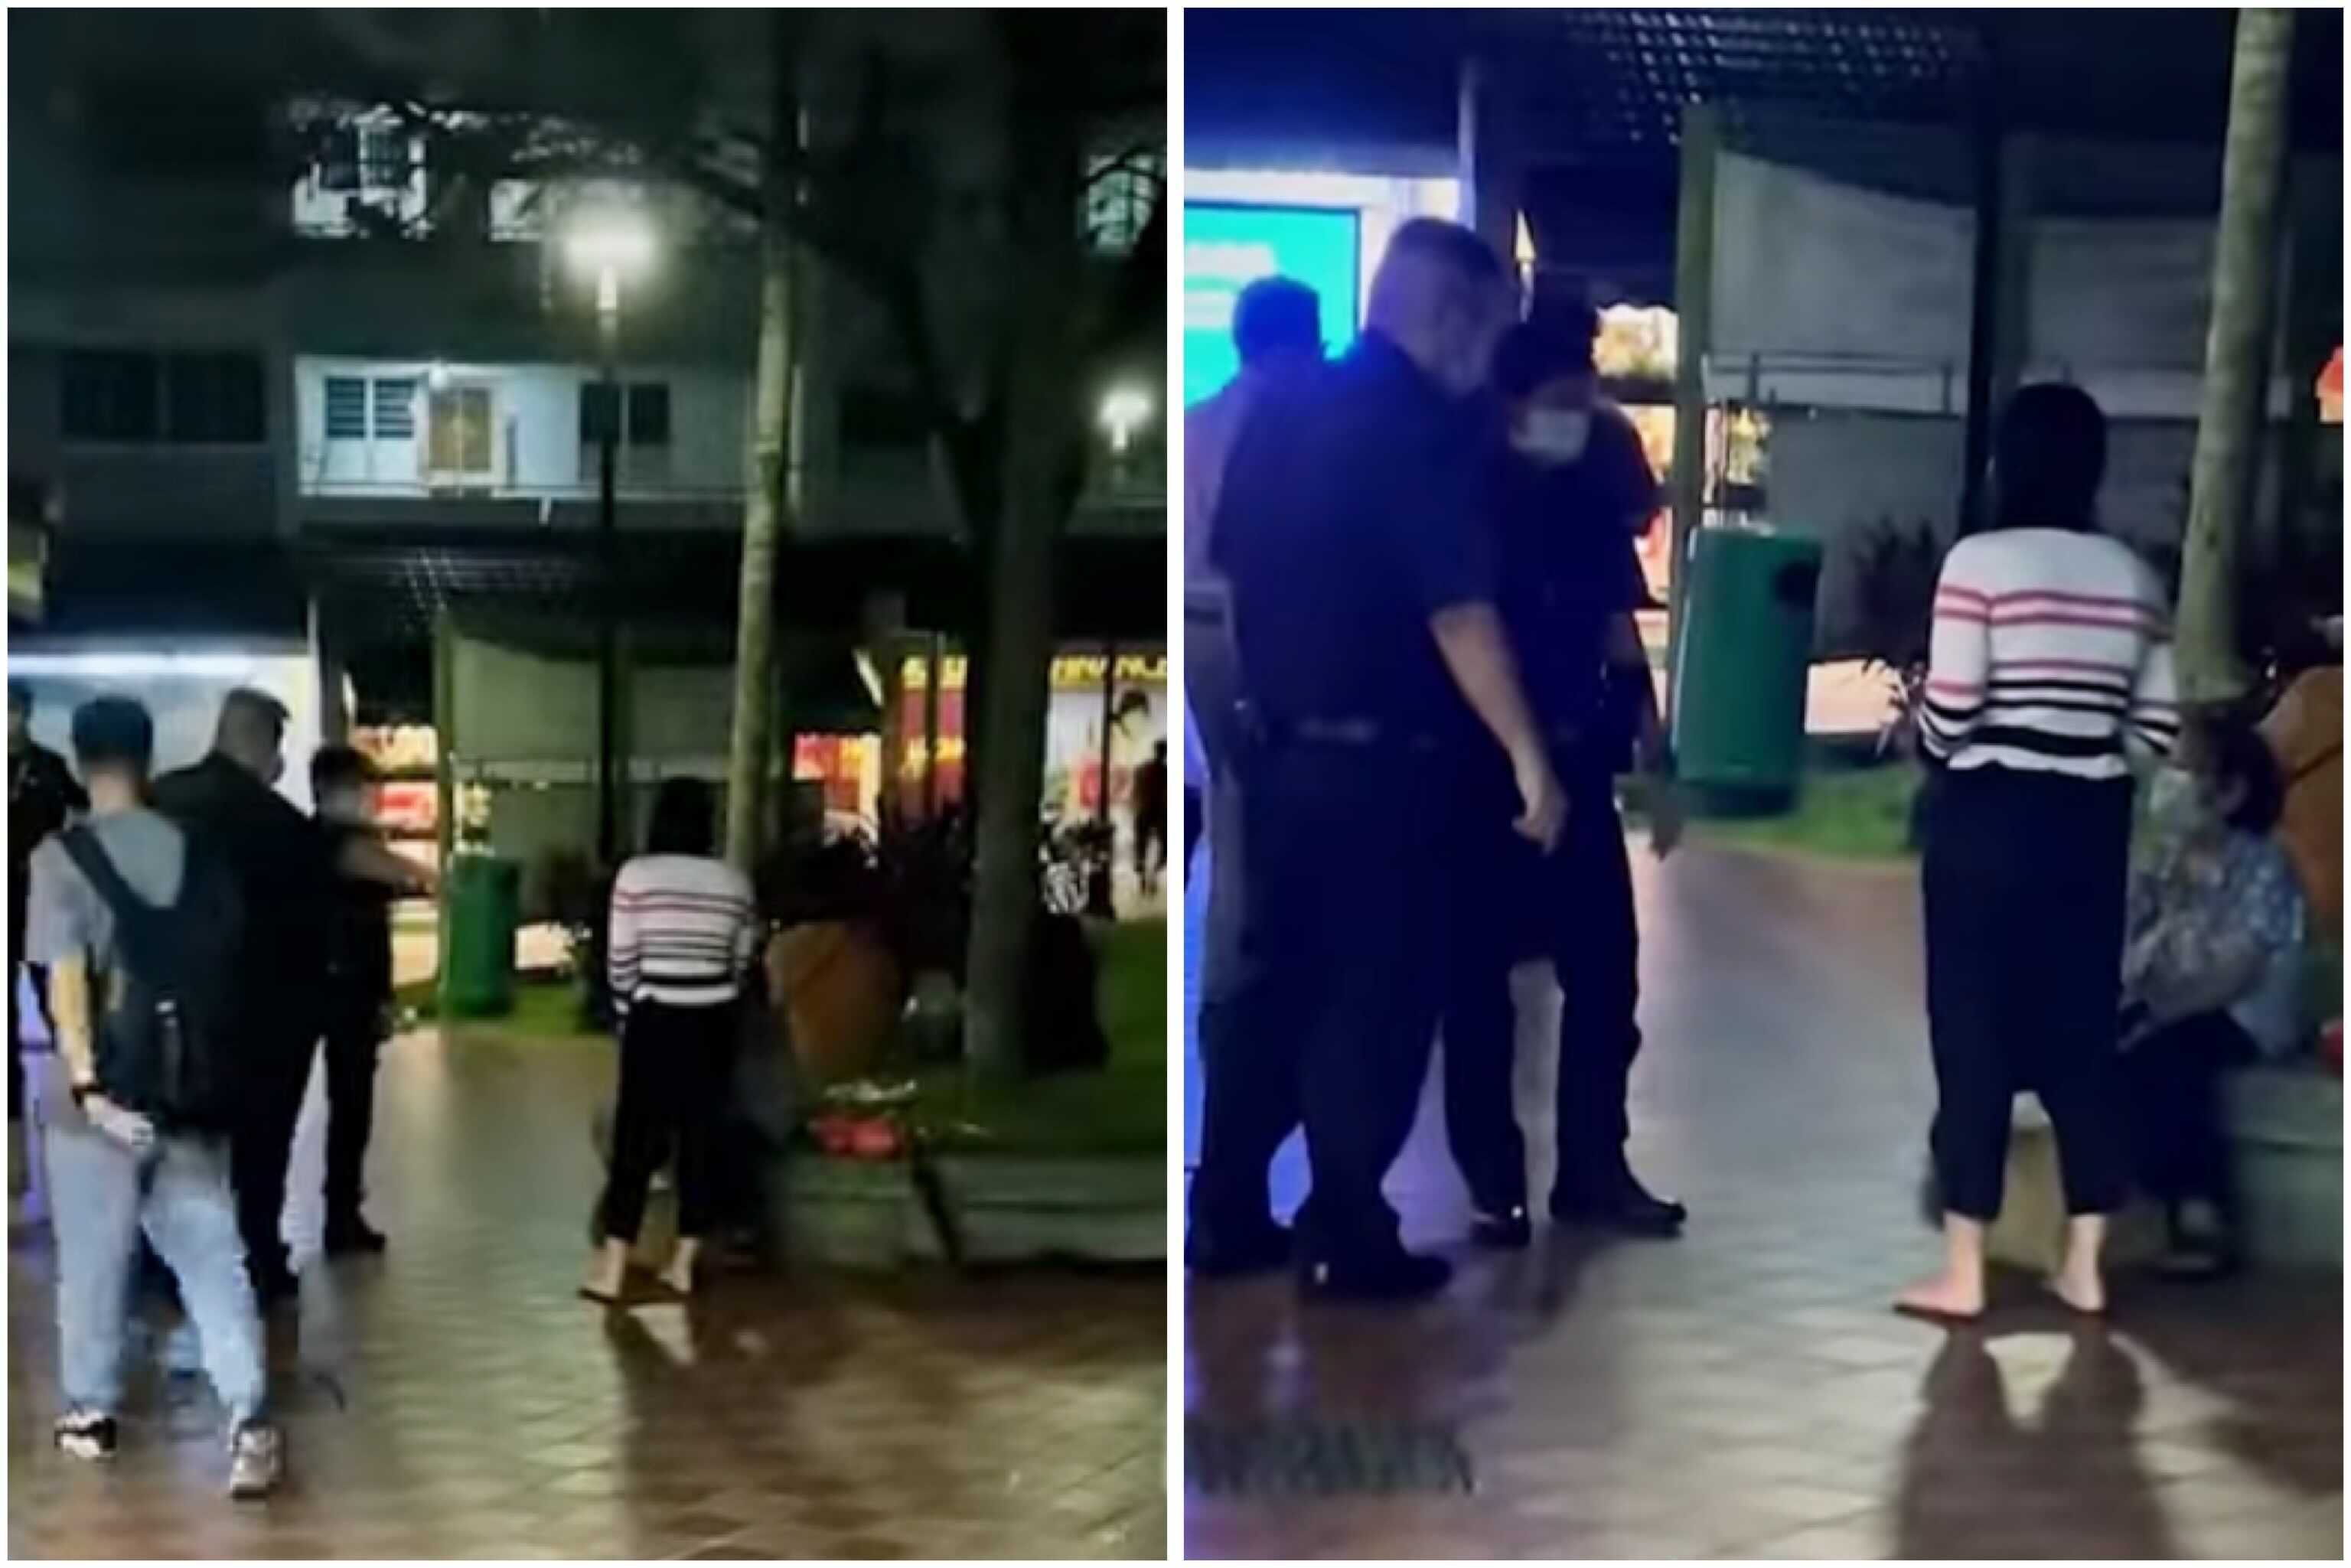 The Online Citizen website re-published content from an Instagram users that showed&nbsp;police officers allegedly bullying an older woman in Yishun for not wearing a mask. The police said that these allegations are untrue.